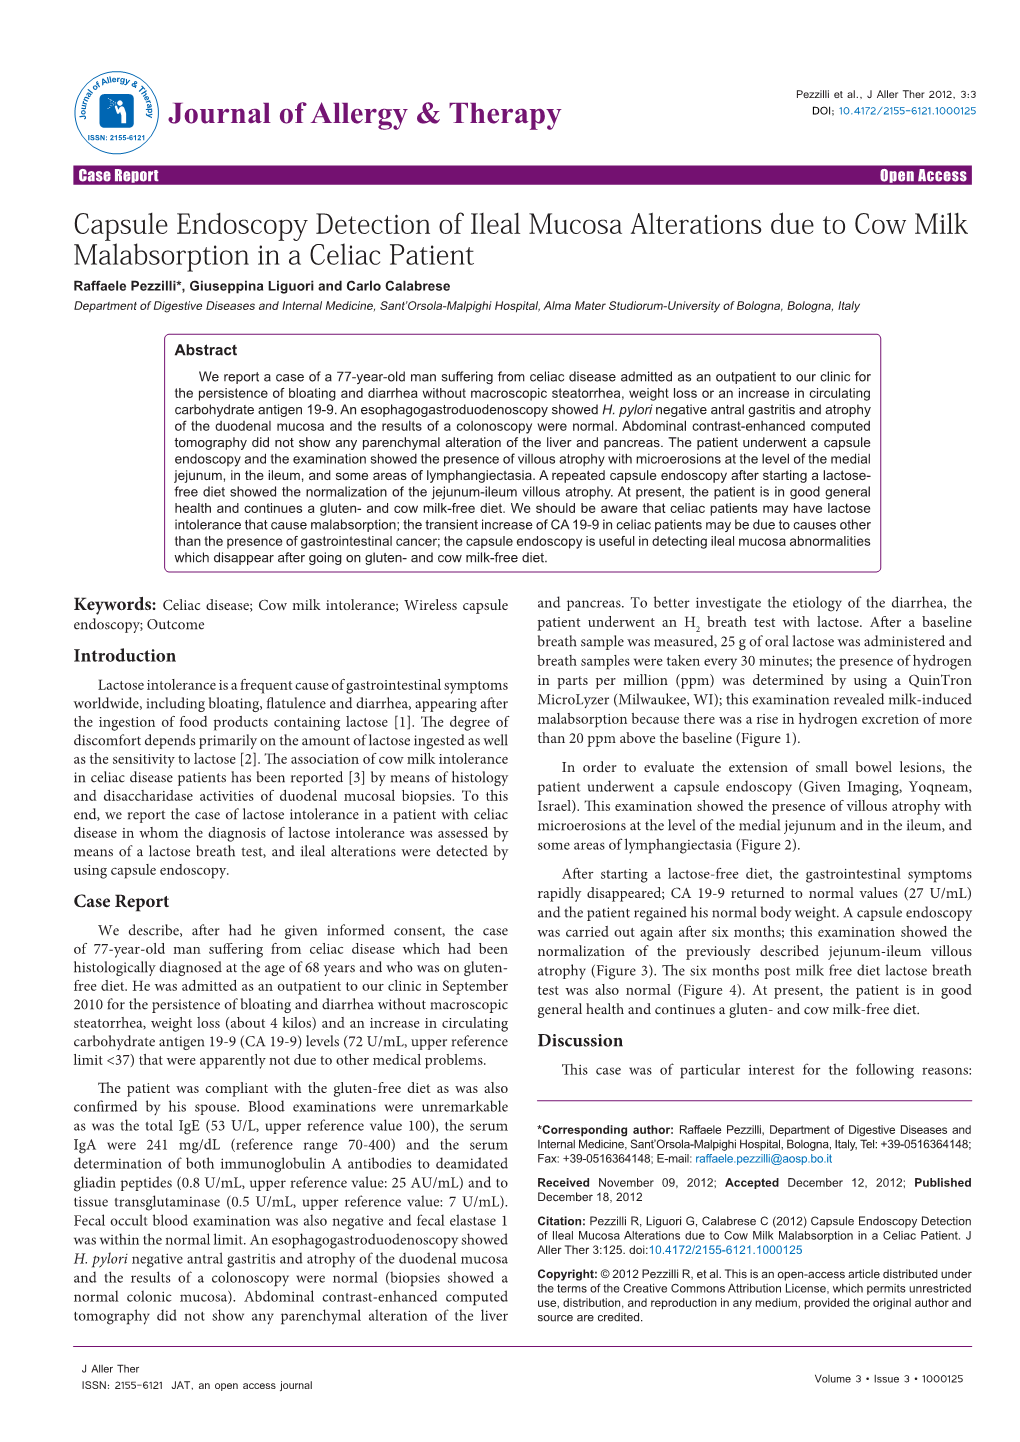 Capsule Endoscopy Detection of Ileal Mucosa Alterations Due to Cow Milk